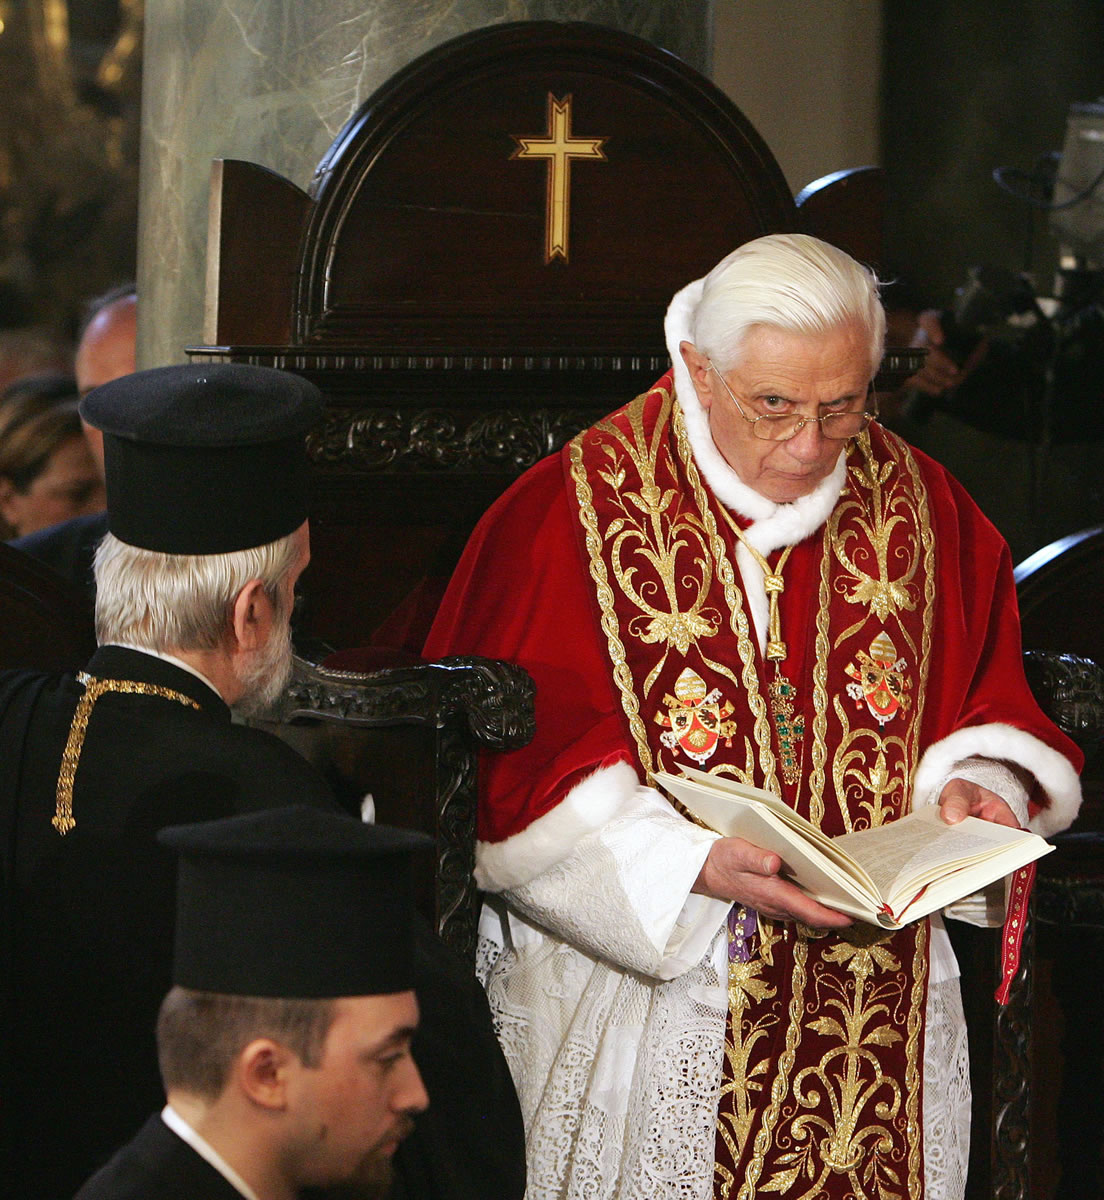 Pope Benedict XVI looks on during a solemn ceremony with Ecumenical Orthodox Patriarch Bartholomew I, unseen, in the Patriarchal Church of St.